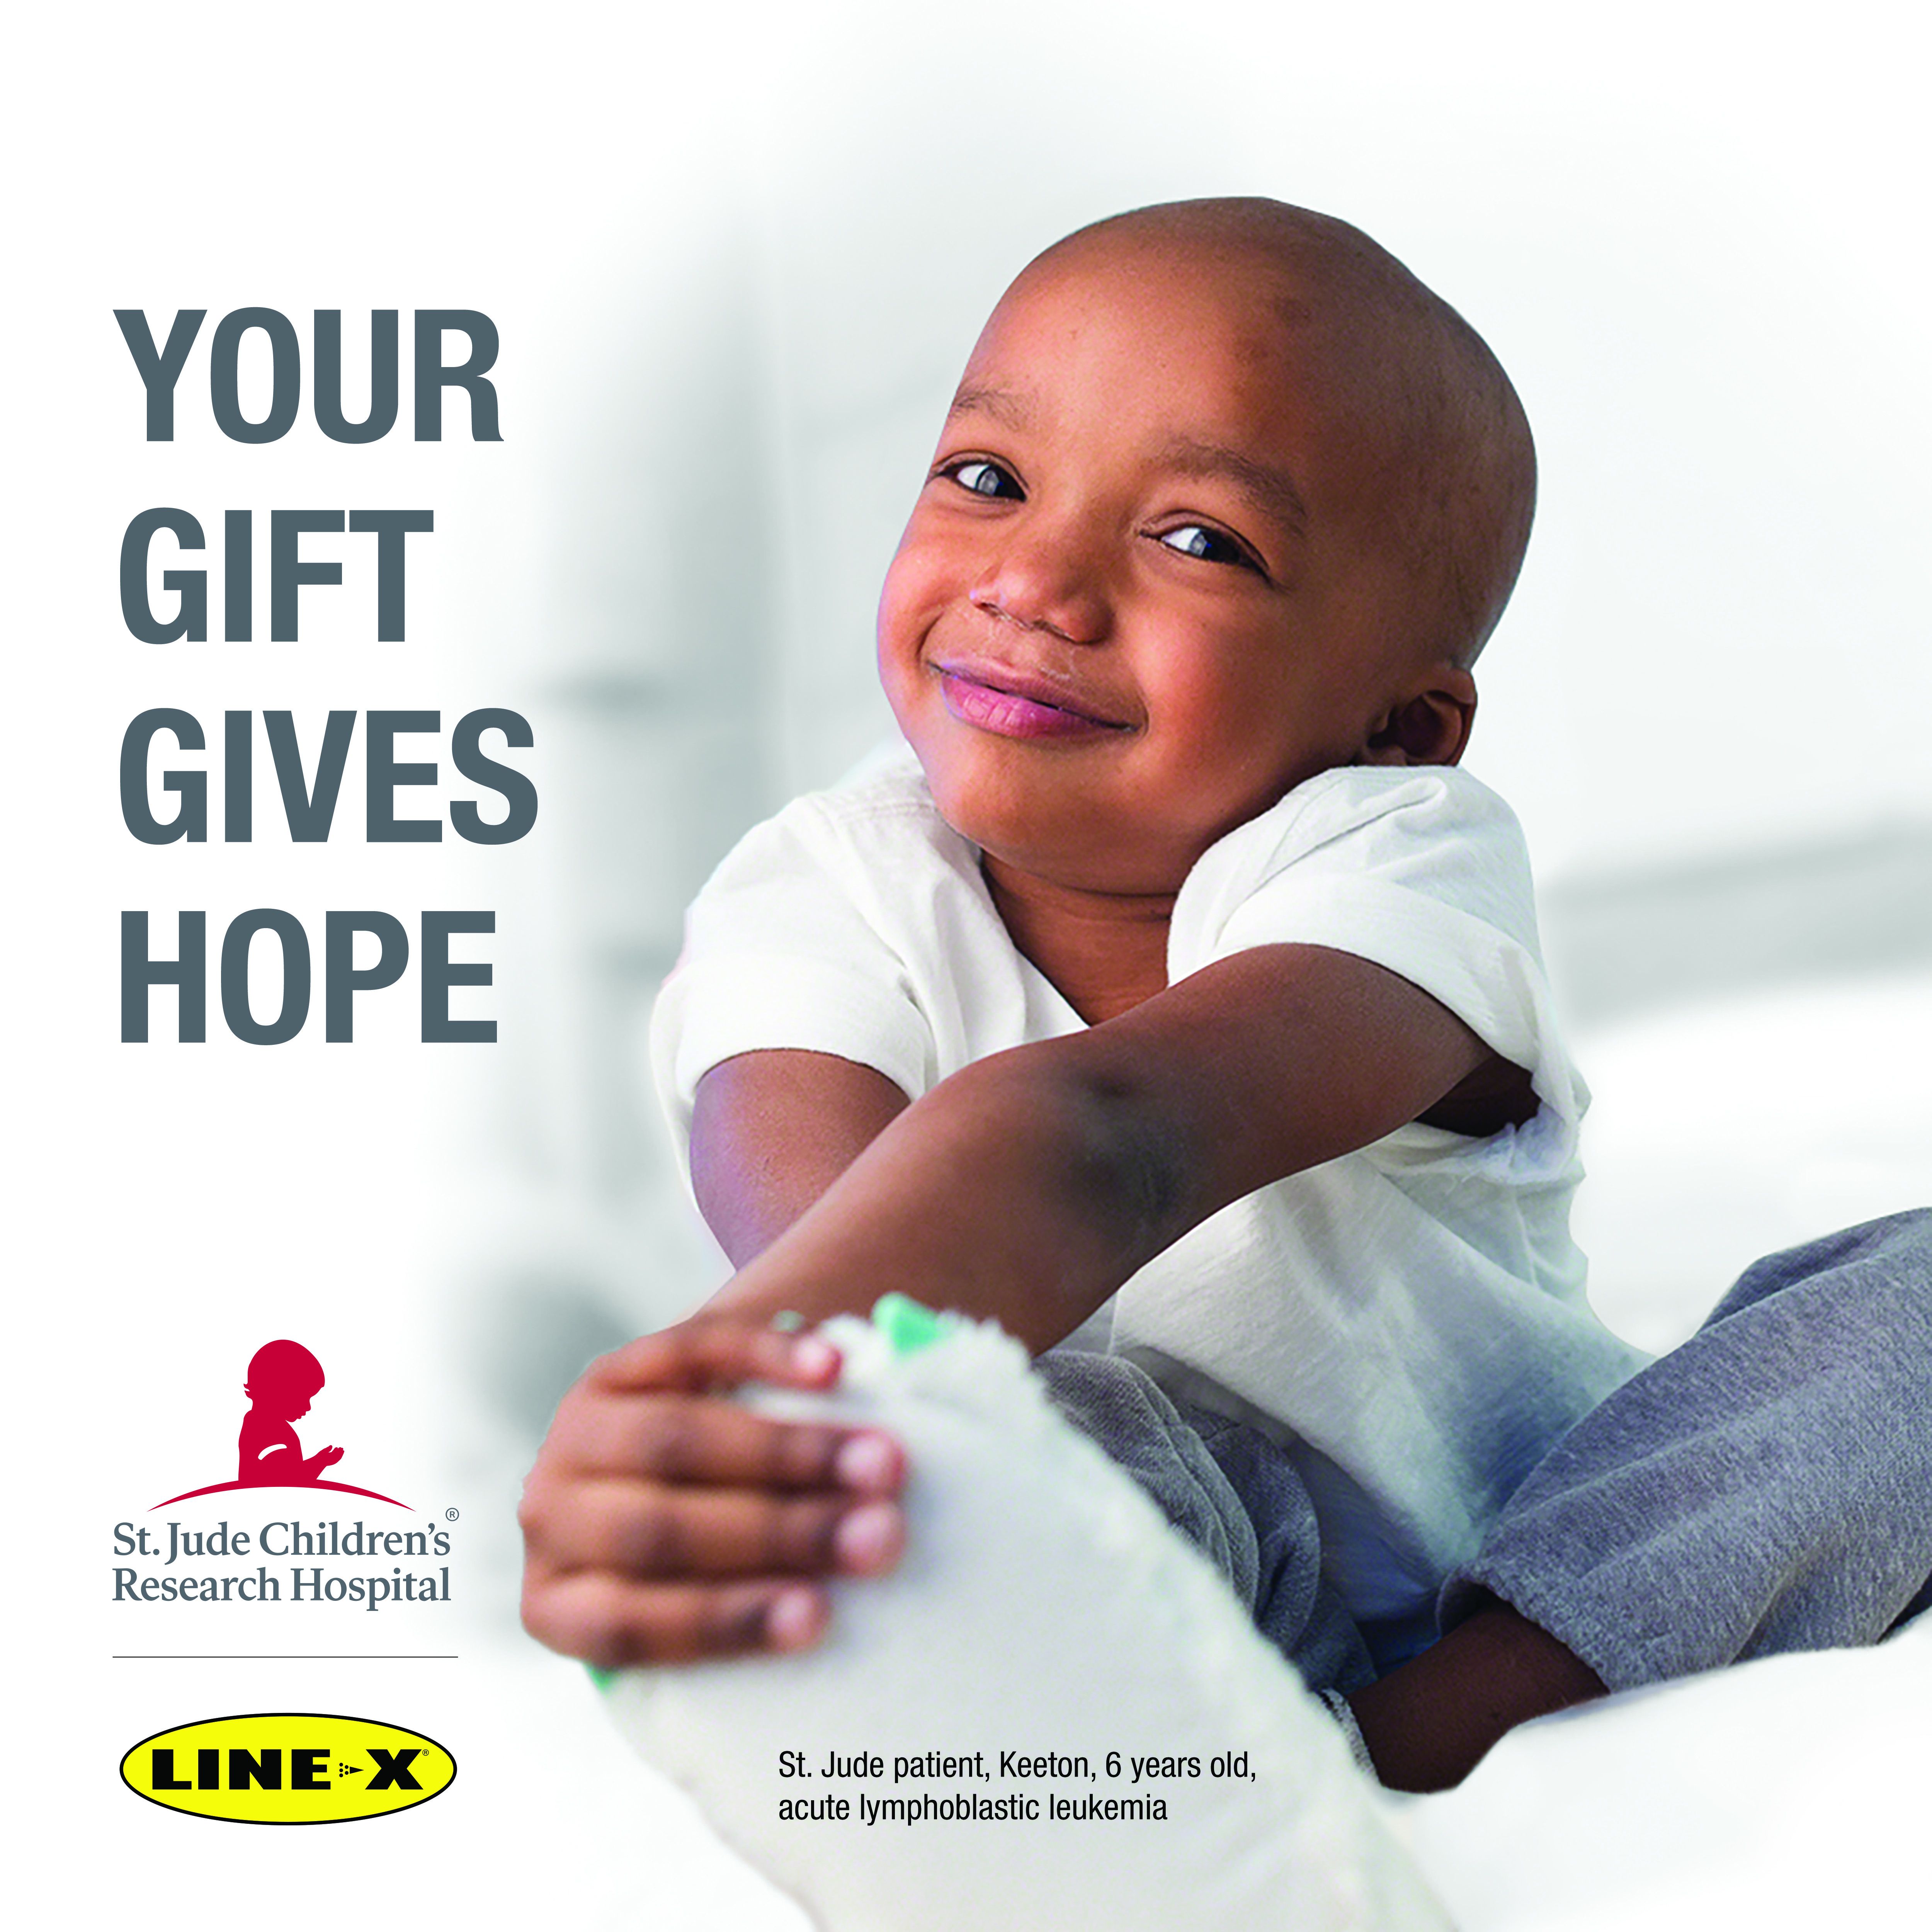 LINEX PARTNERS WITH ST. JUDE CHILDREN’S RESEARCH HOSPITAL